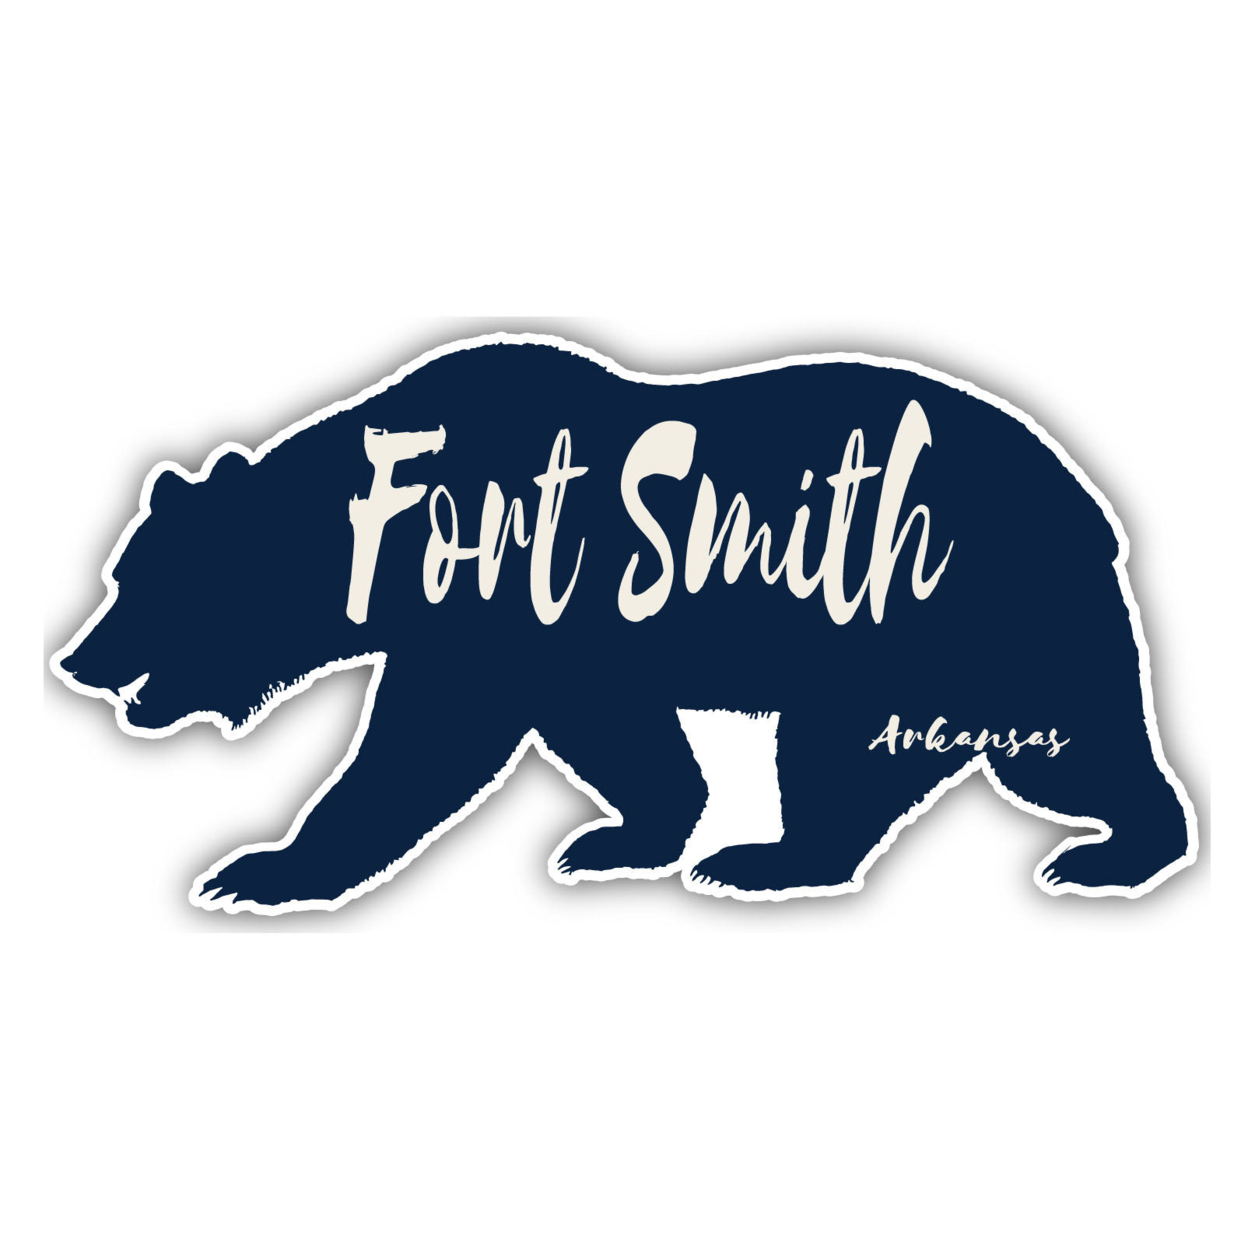 Fort Smith Arkansas Souvenir Decorative Stickers (Choose Theme And Size) - 4-Pack, 8-Inch, Bear